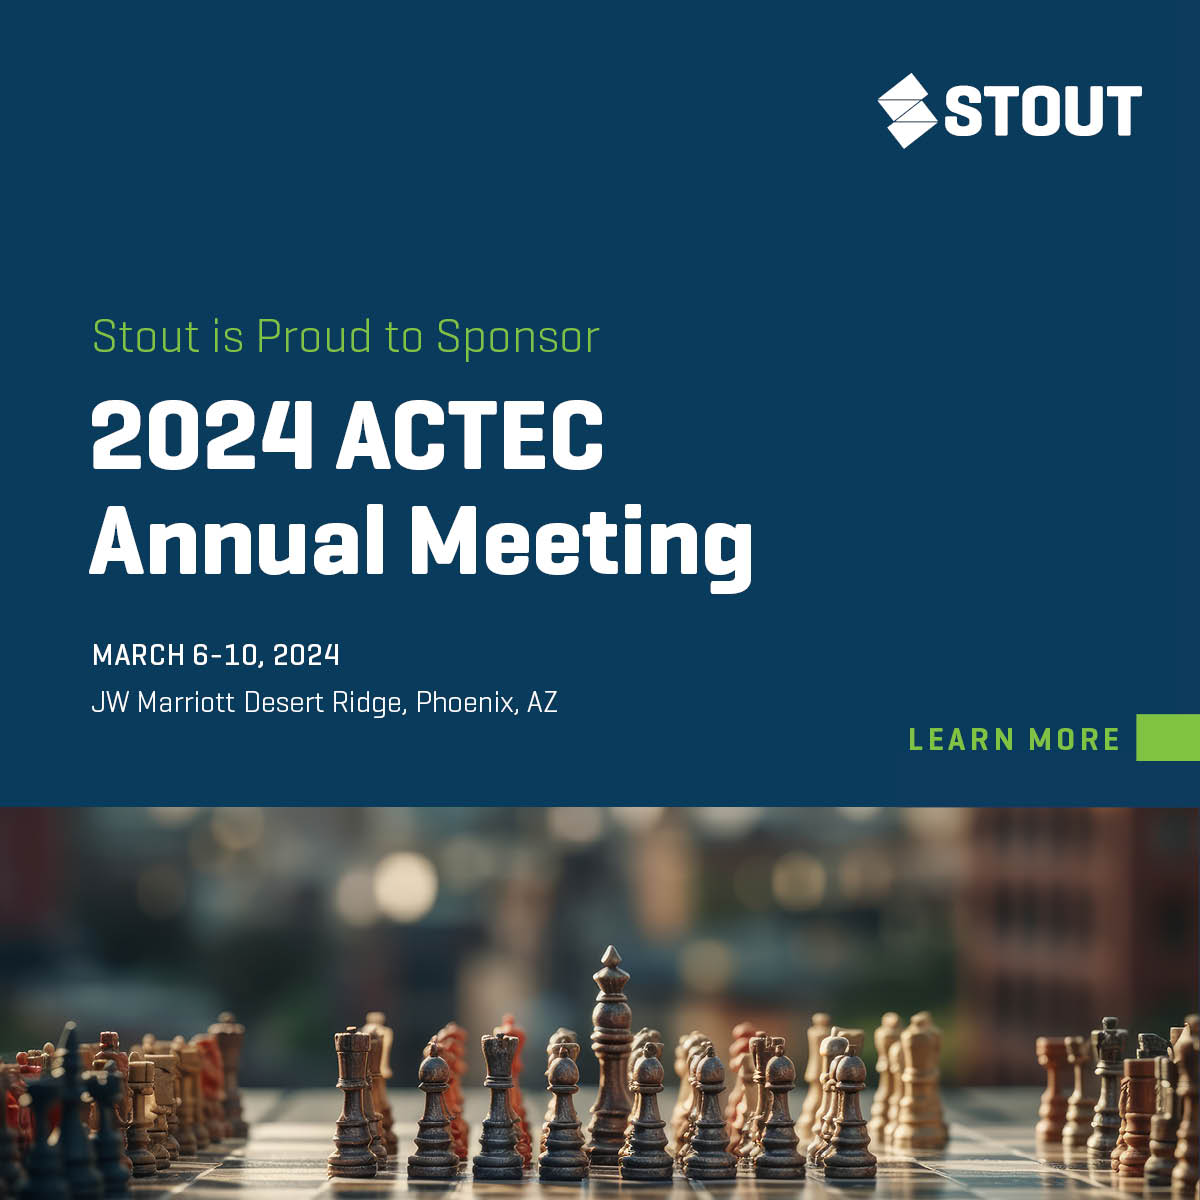 Stout is pleased to sponsor the 2024 ACTEC Annual Meeting. Join us at our booth and meet our Stout attendees, Aaron Stumpf, Carsten Hoffmann, Garry Marshall, and Robert Moore. Learn more: bit.ly/3GtQS1m